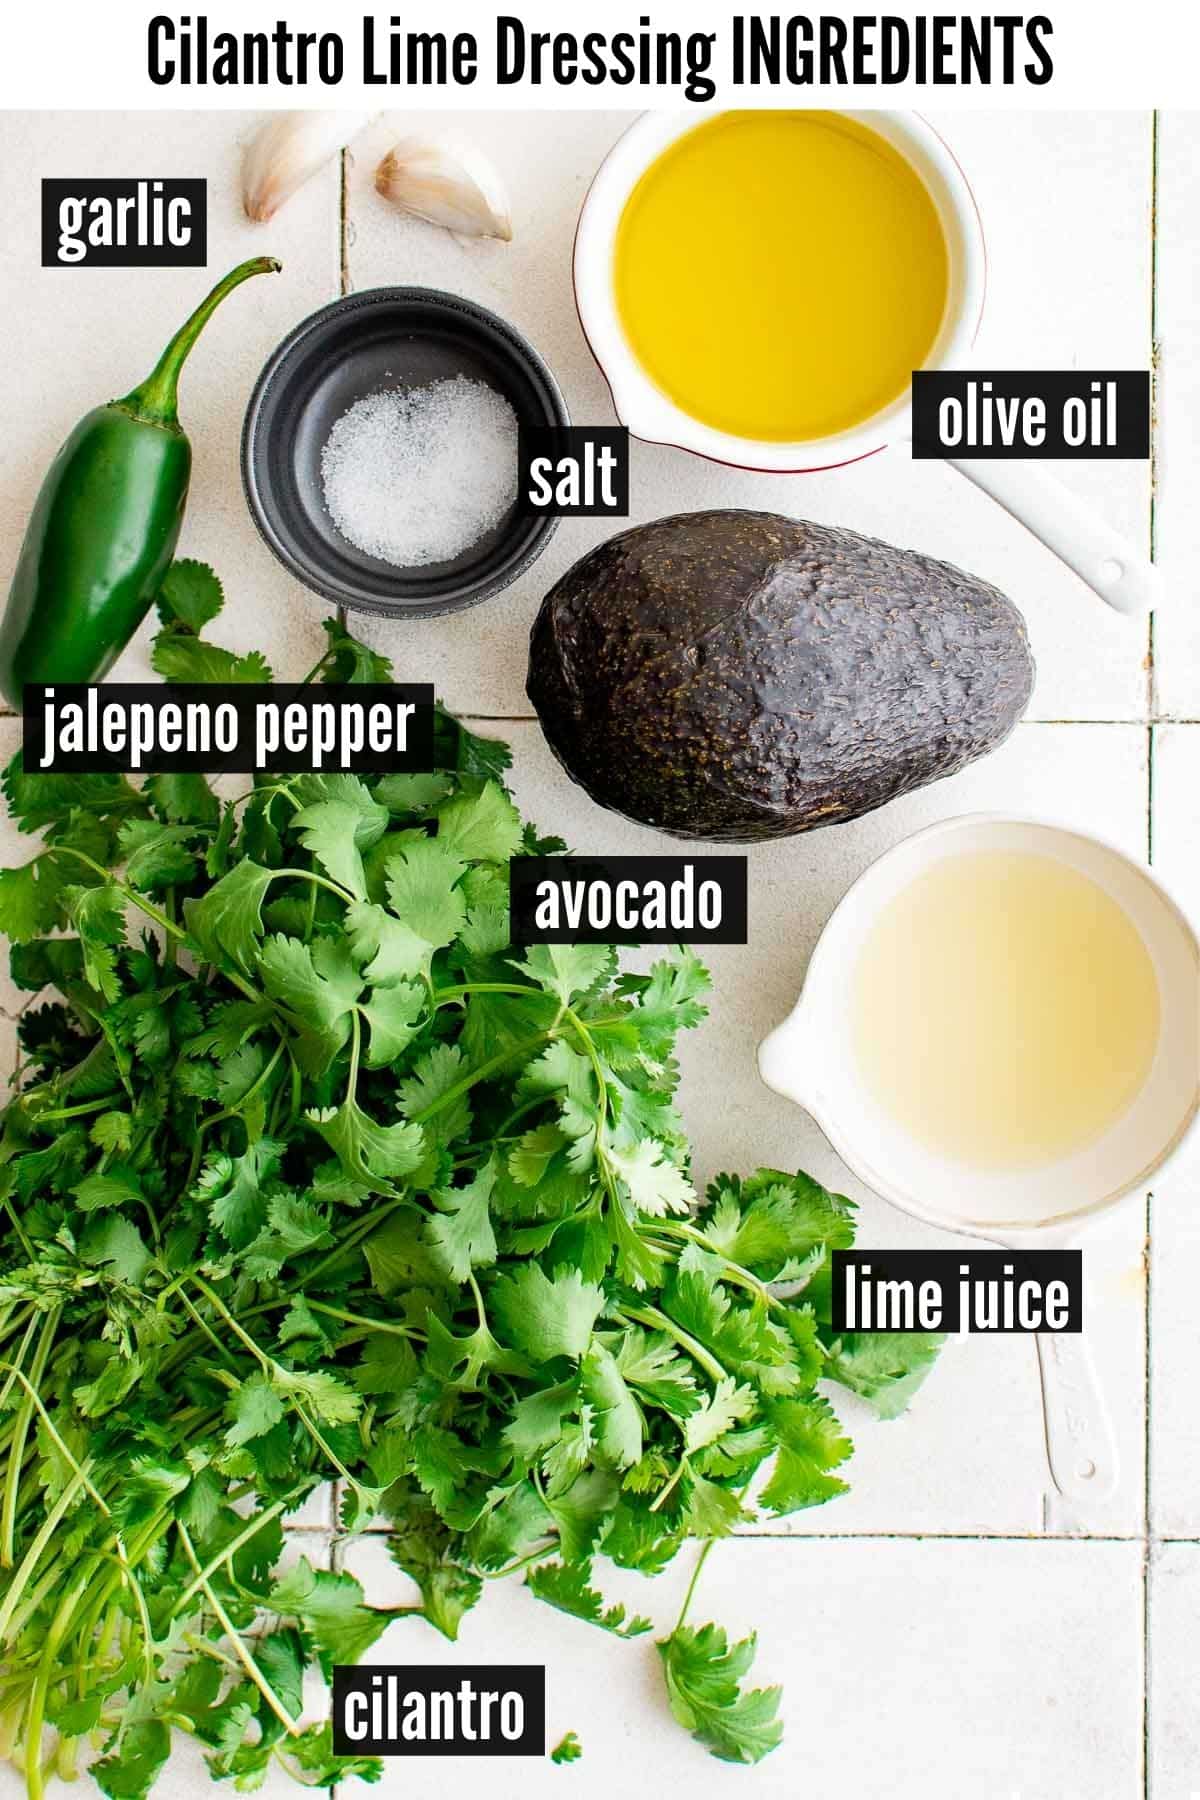 cilantro lime dressing ingredients labeled